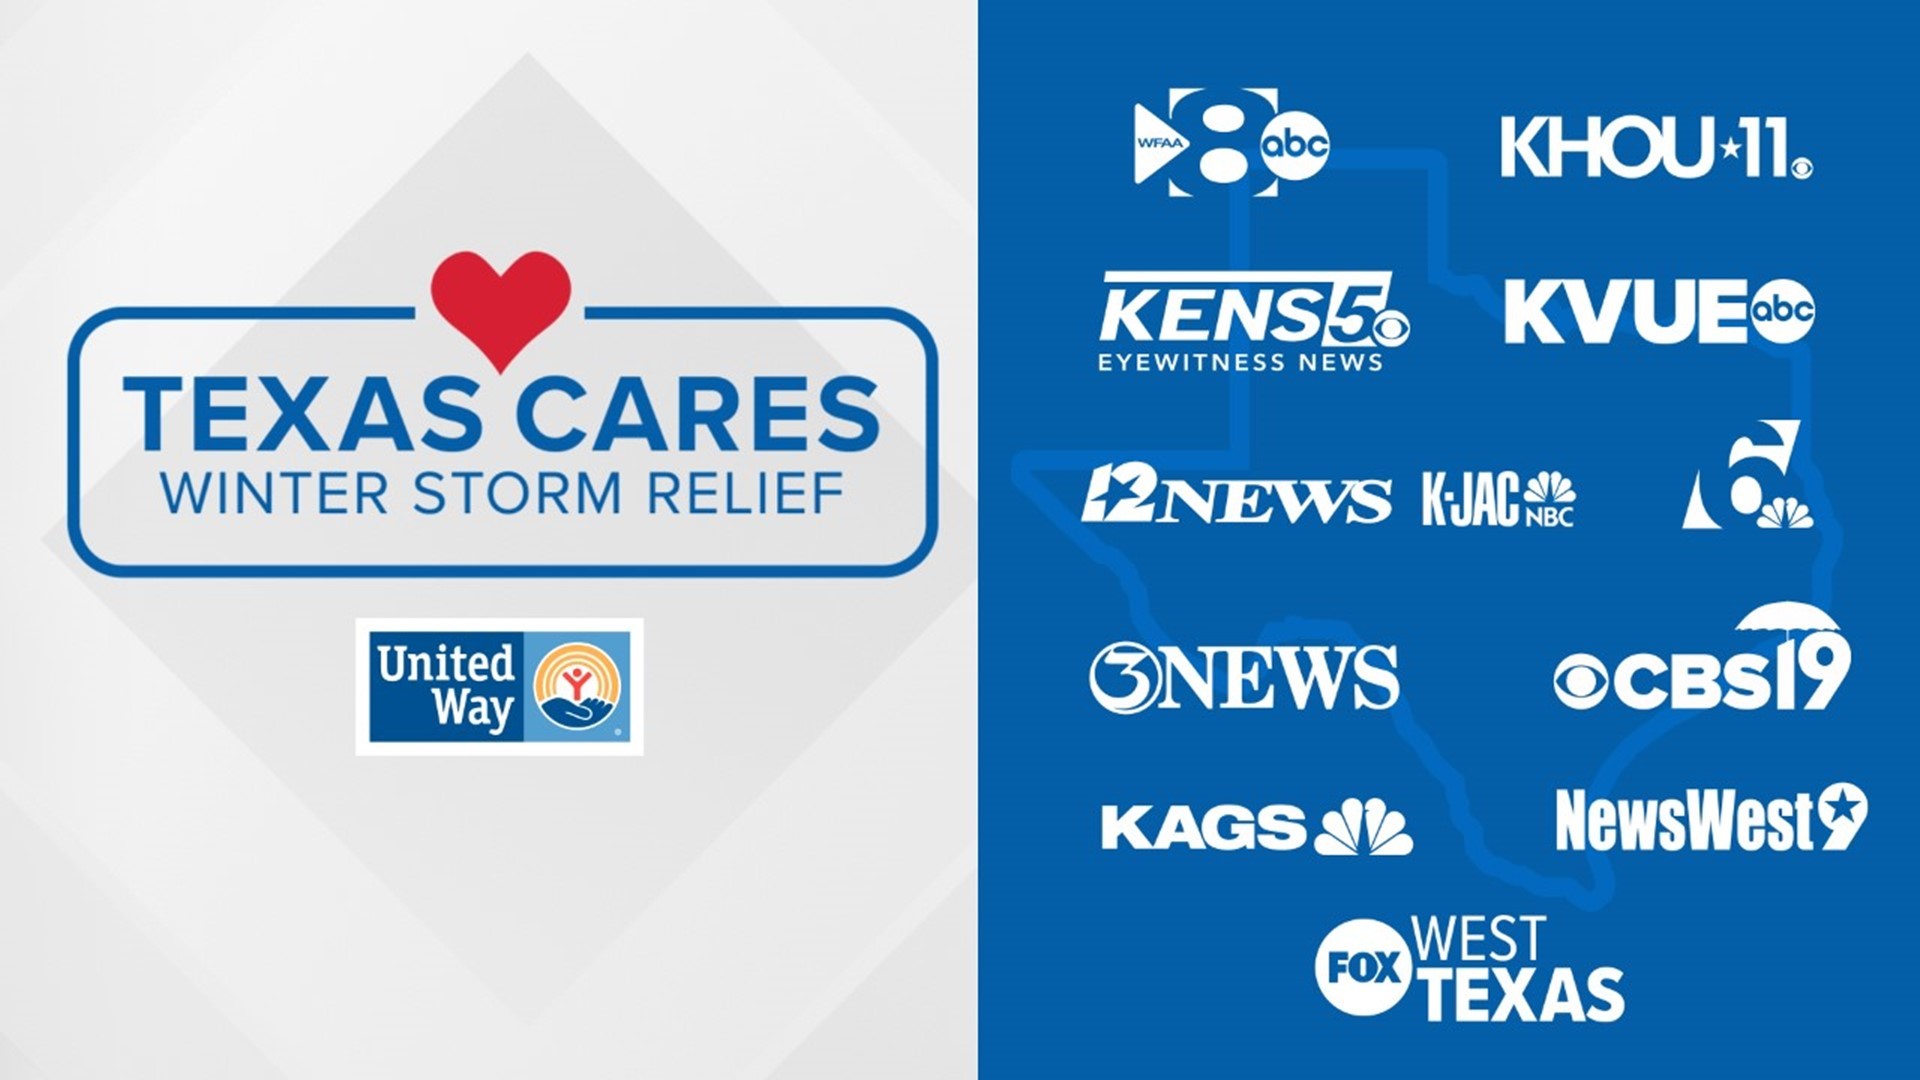 KCEN and its sister stations in Texas have partnered with United Way to raise funds for those who have been affected by the Winter Storm